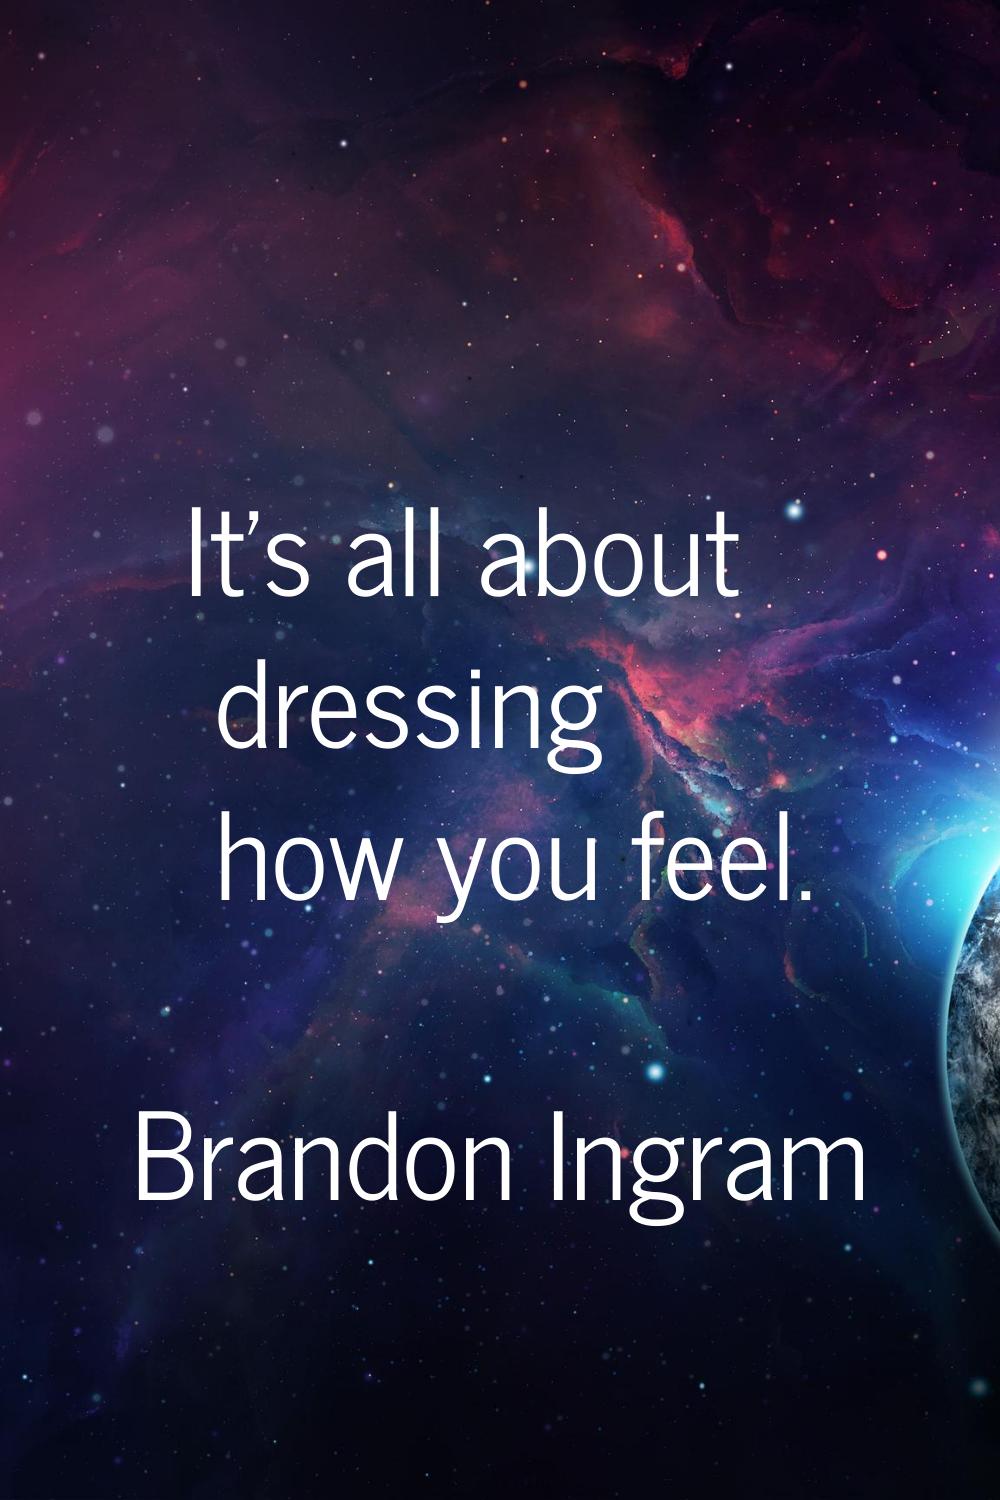 It's all about dressing how you feel.